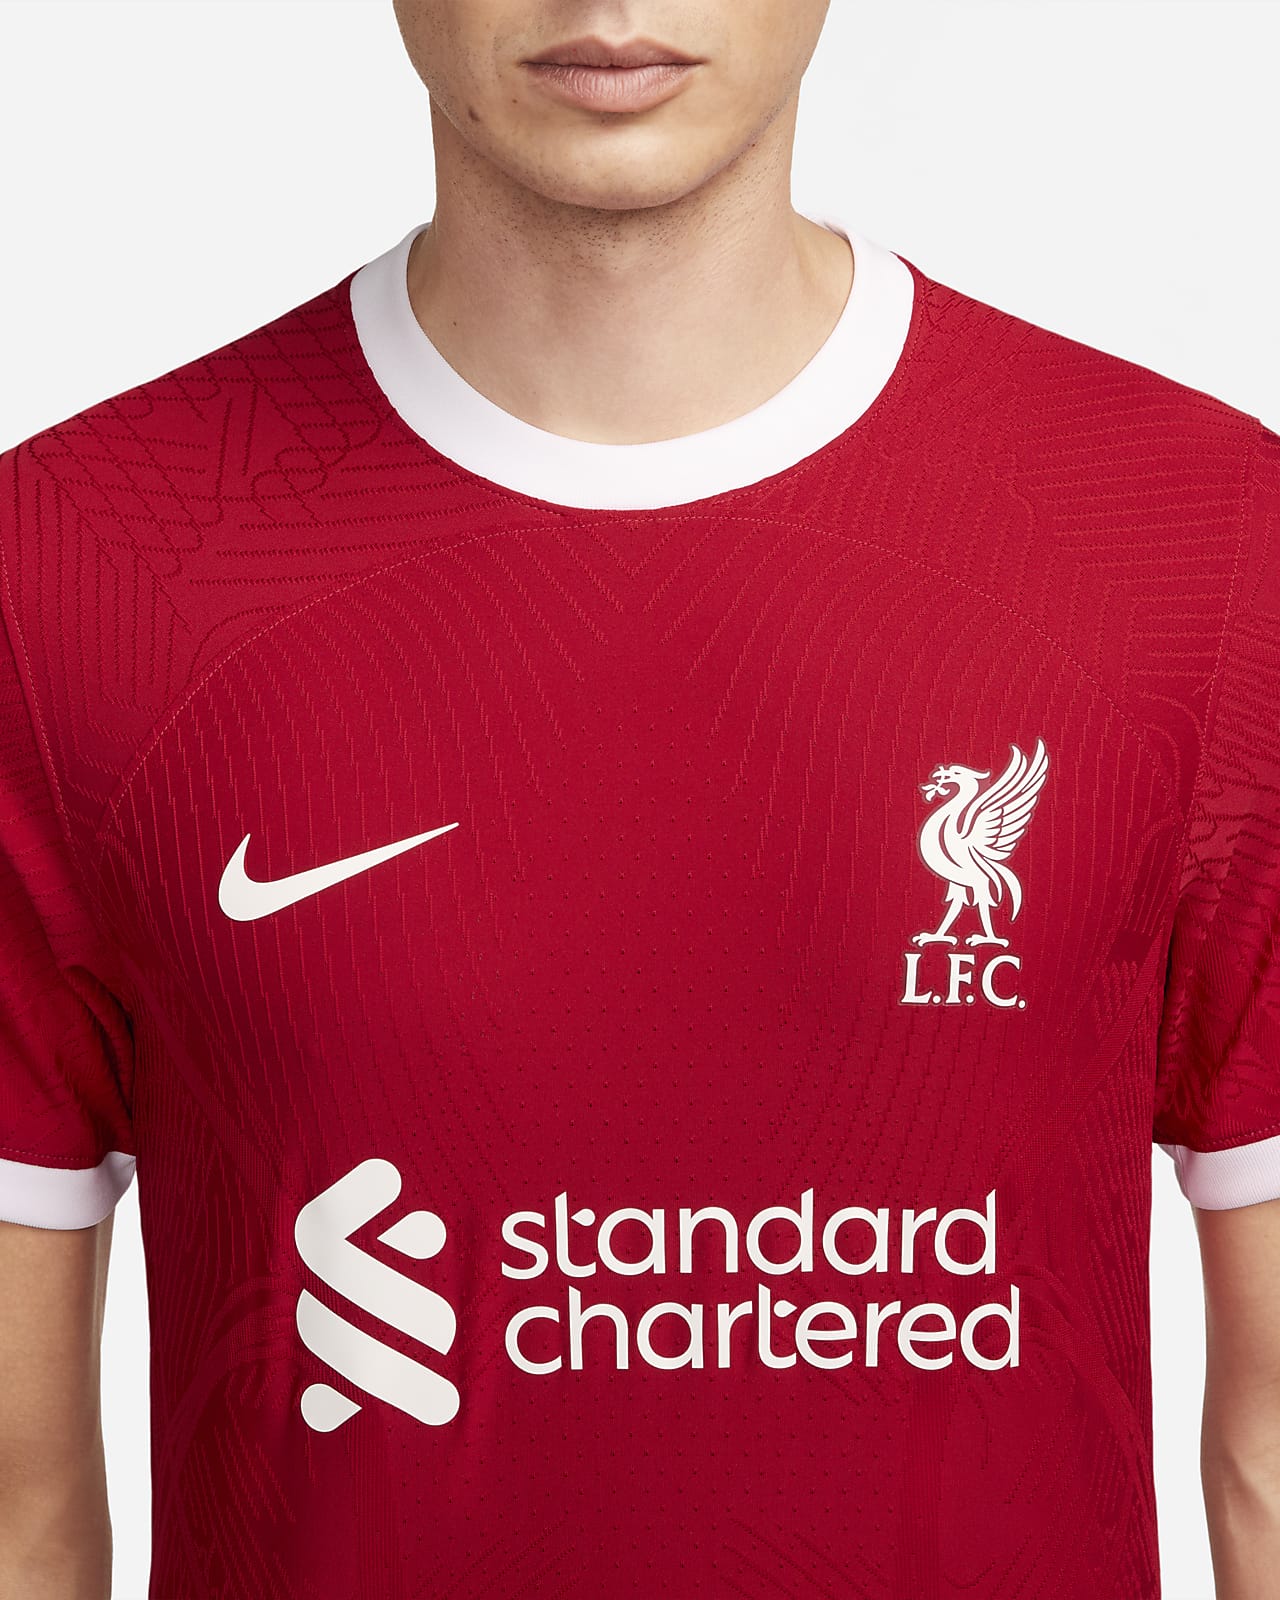 Nike Men's Liverpool '21 Vapor Authentic Match Home Jersey, XL, Red